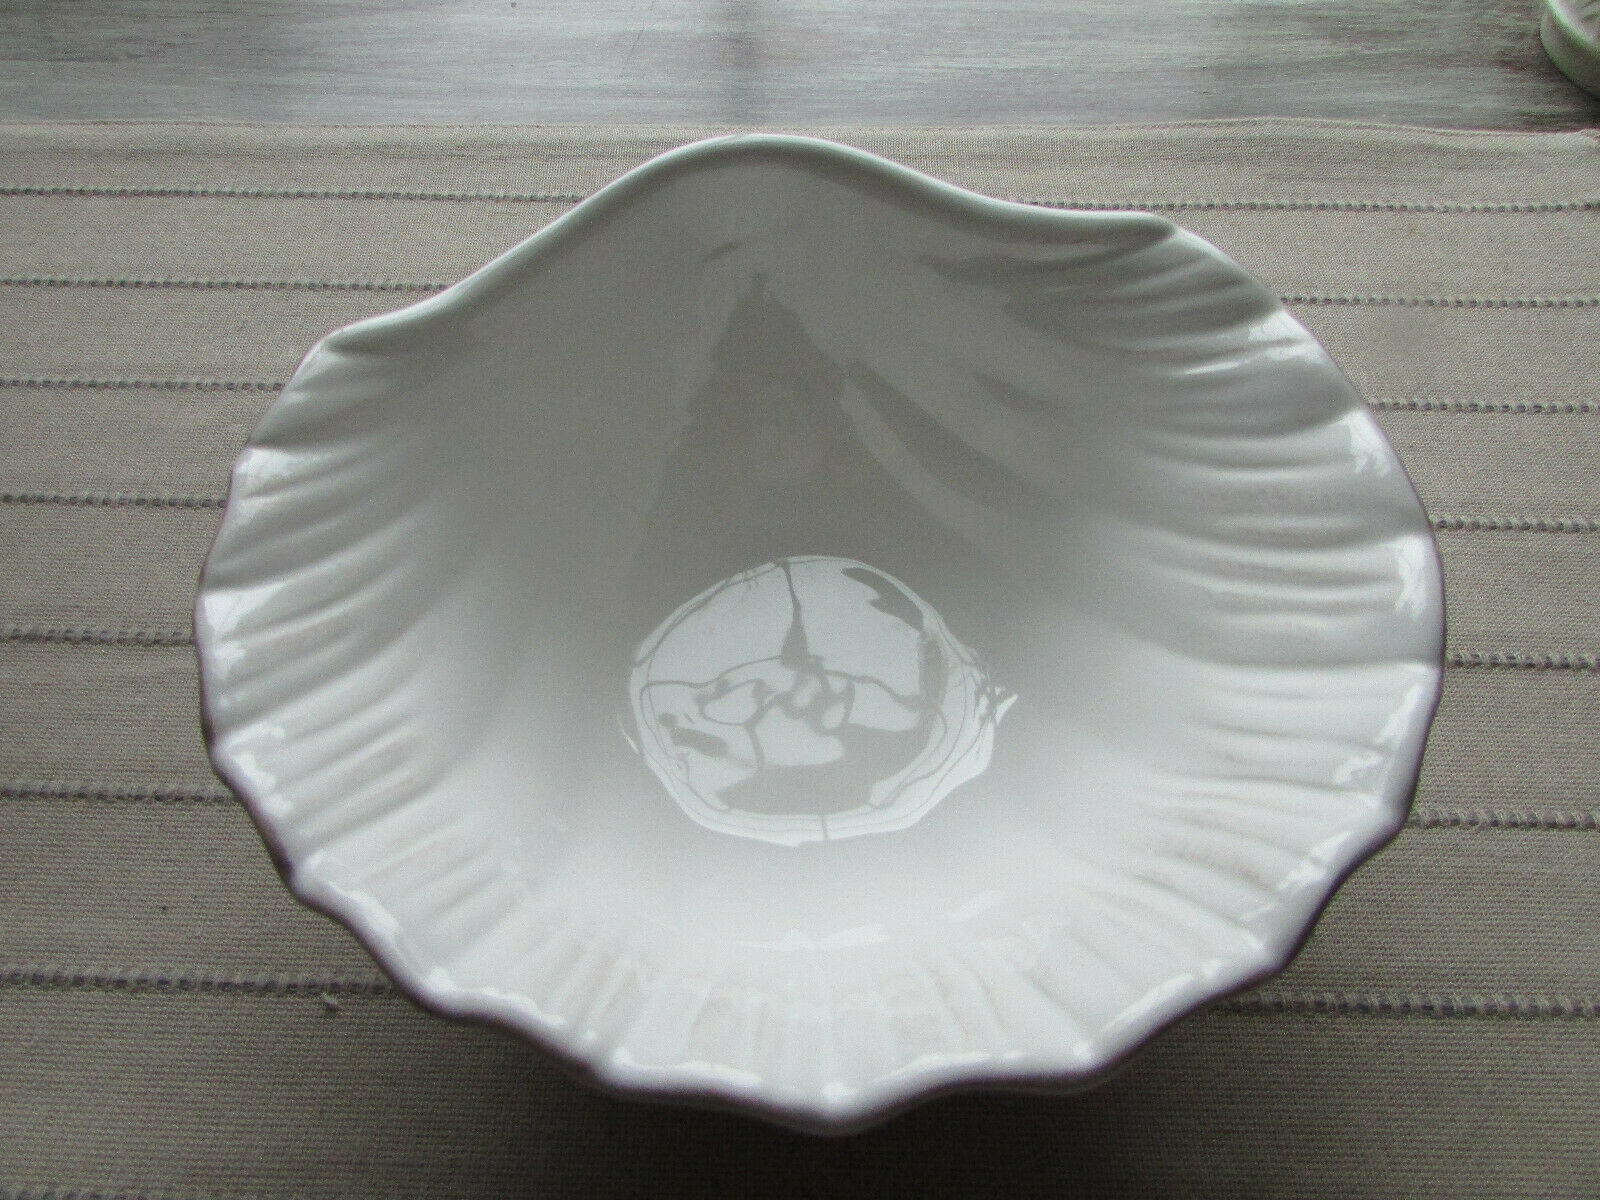 Primary image for LENOX WHITE CONCH SHELL PATTERN CANDY DISH AMERICAN BY DESIGN 6.5"